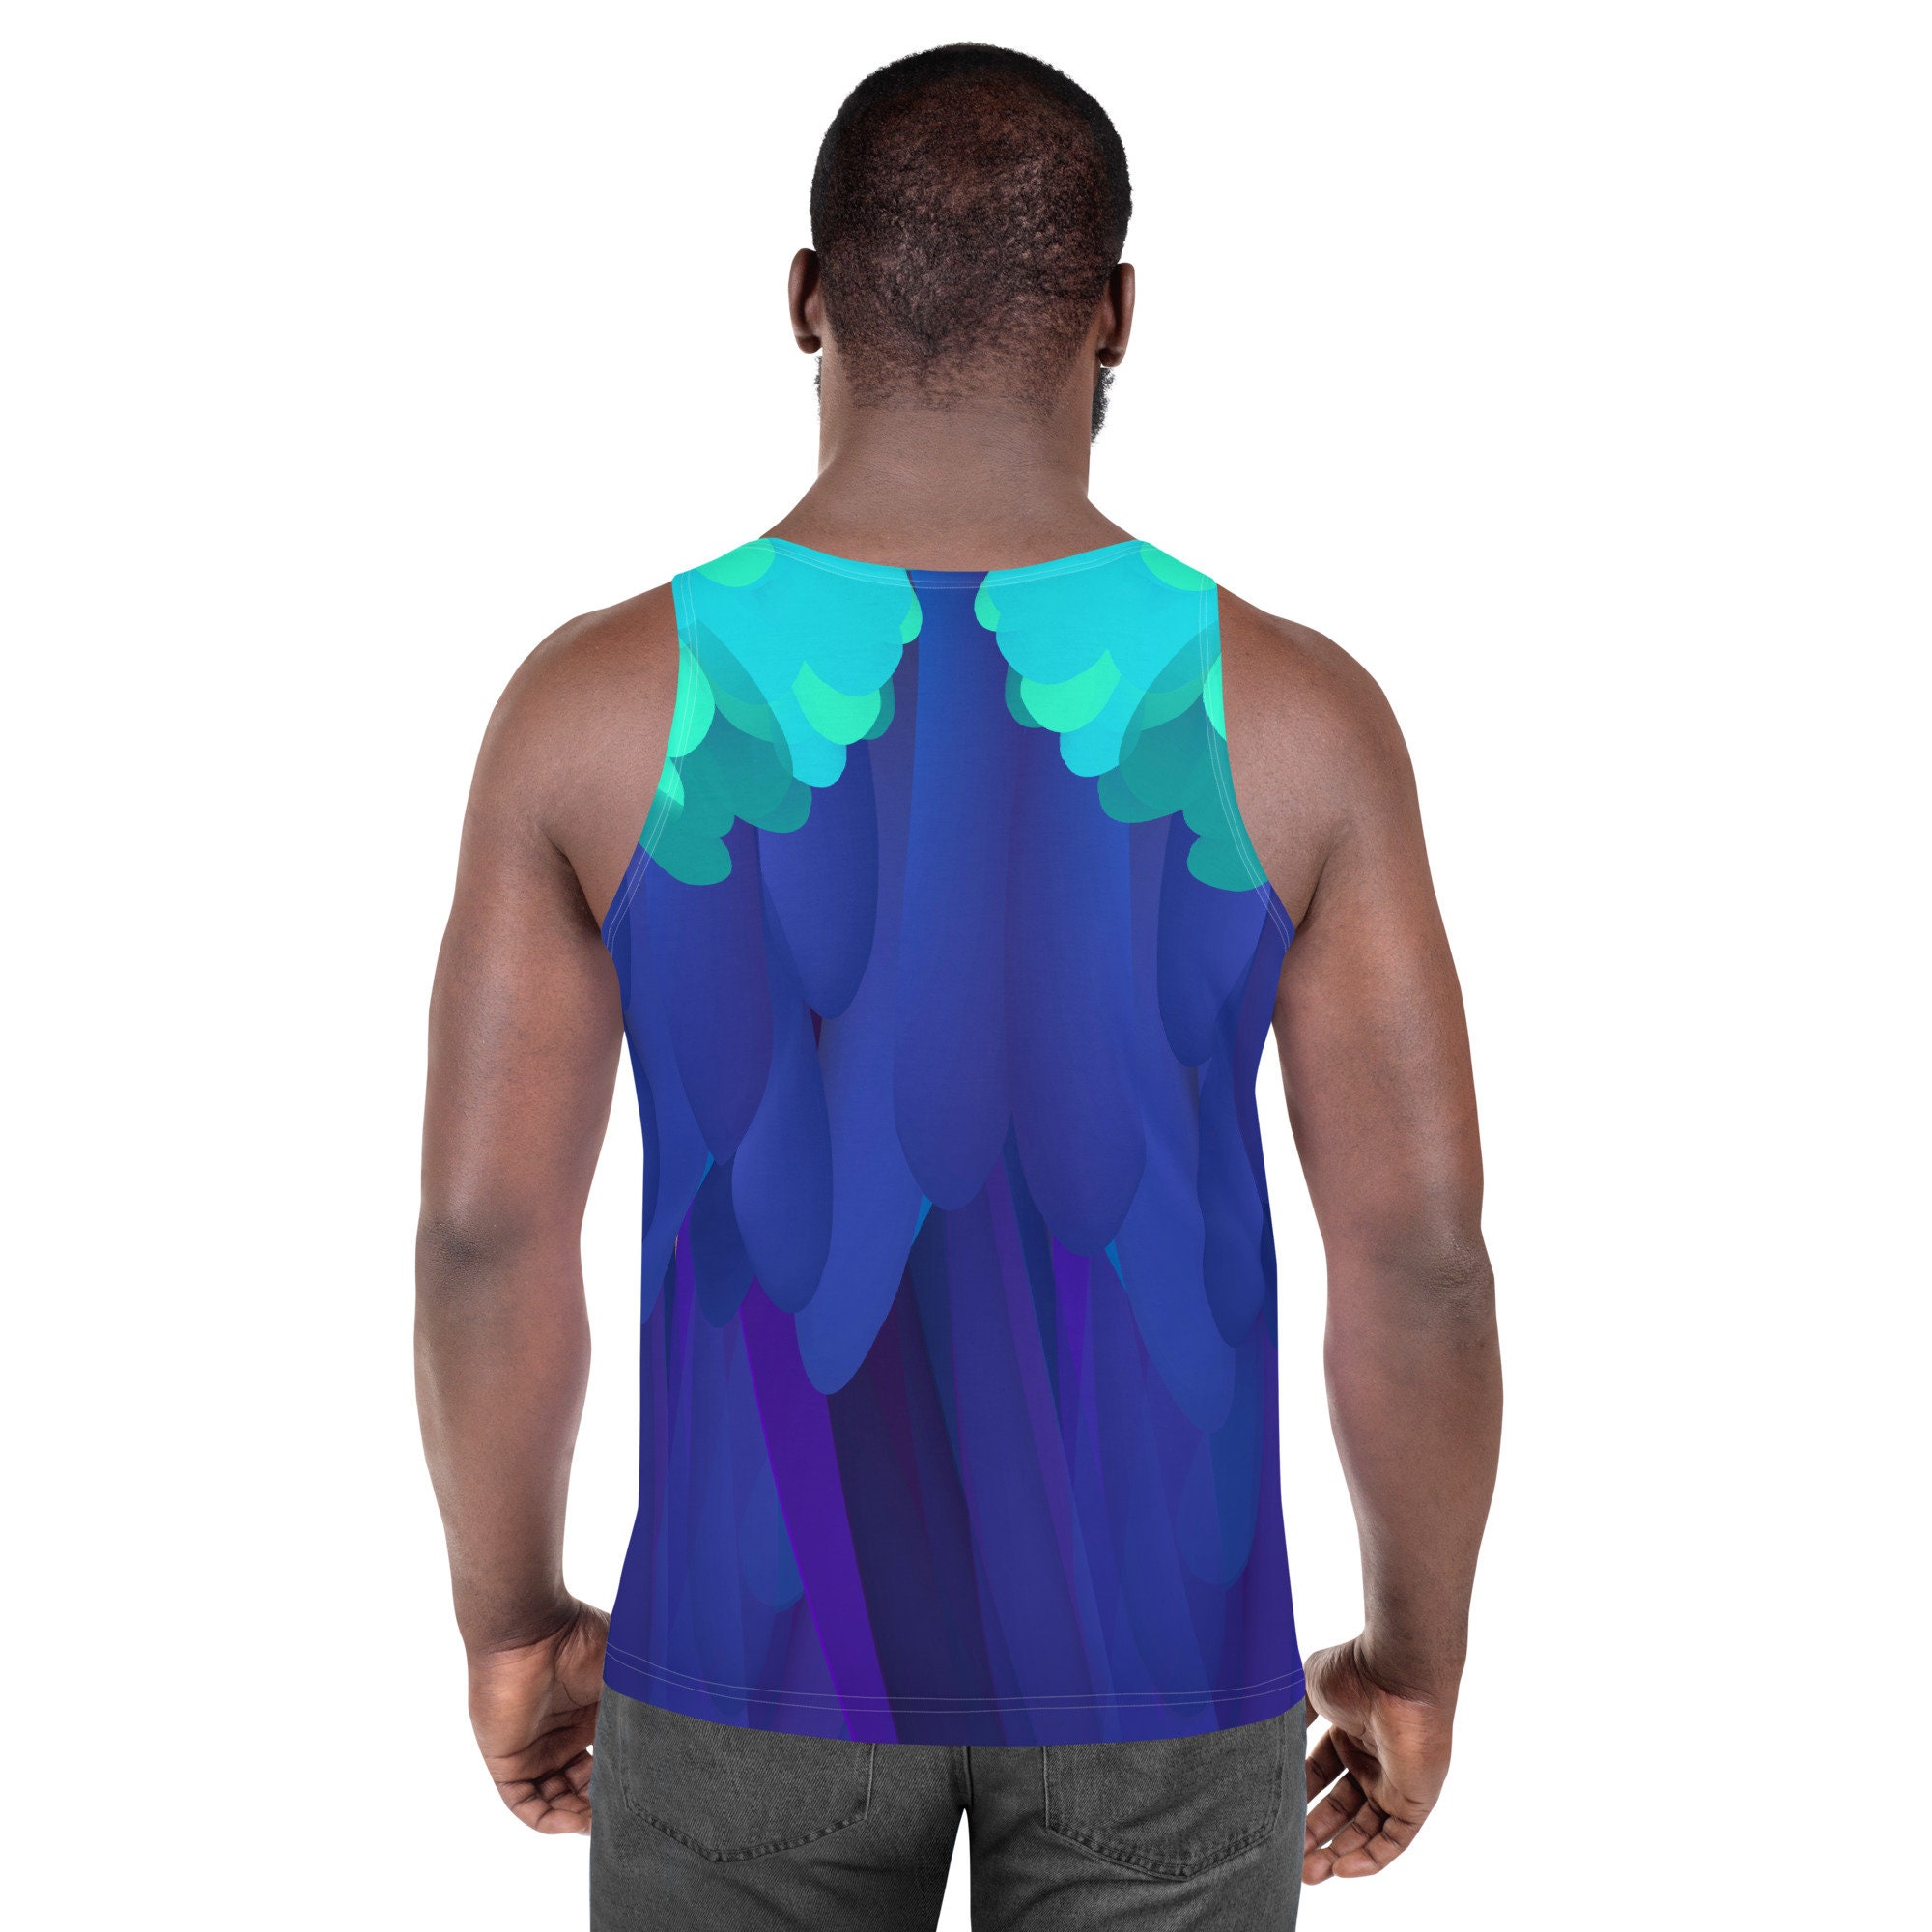 The Exotic Bird Adventure is Out There Up Running 3D Tank Top